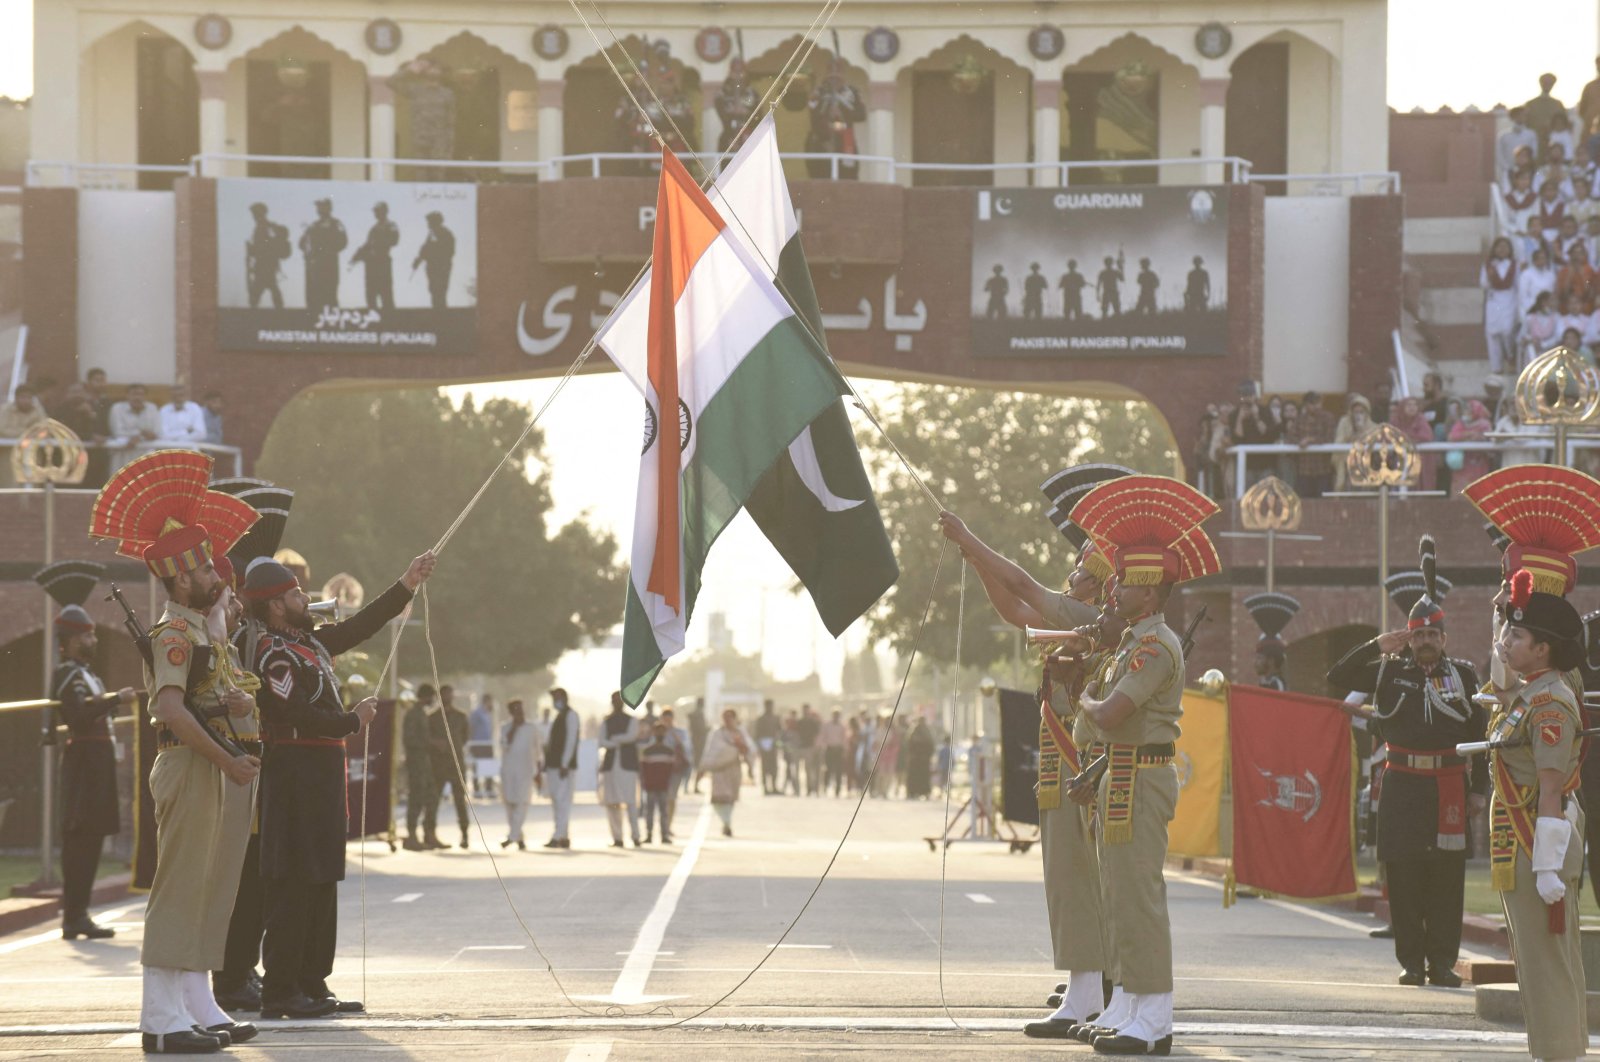 Indian Border Security Force personnel (in brown uniforms) and Pakistani Rangers (in black uniforms) take part in the beating retreat ceremony at the India-Pakistan Wagah border post, March 9, 2022. (AFP Photo)